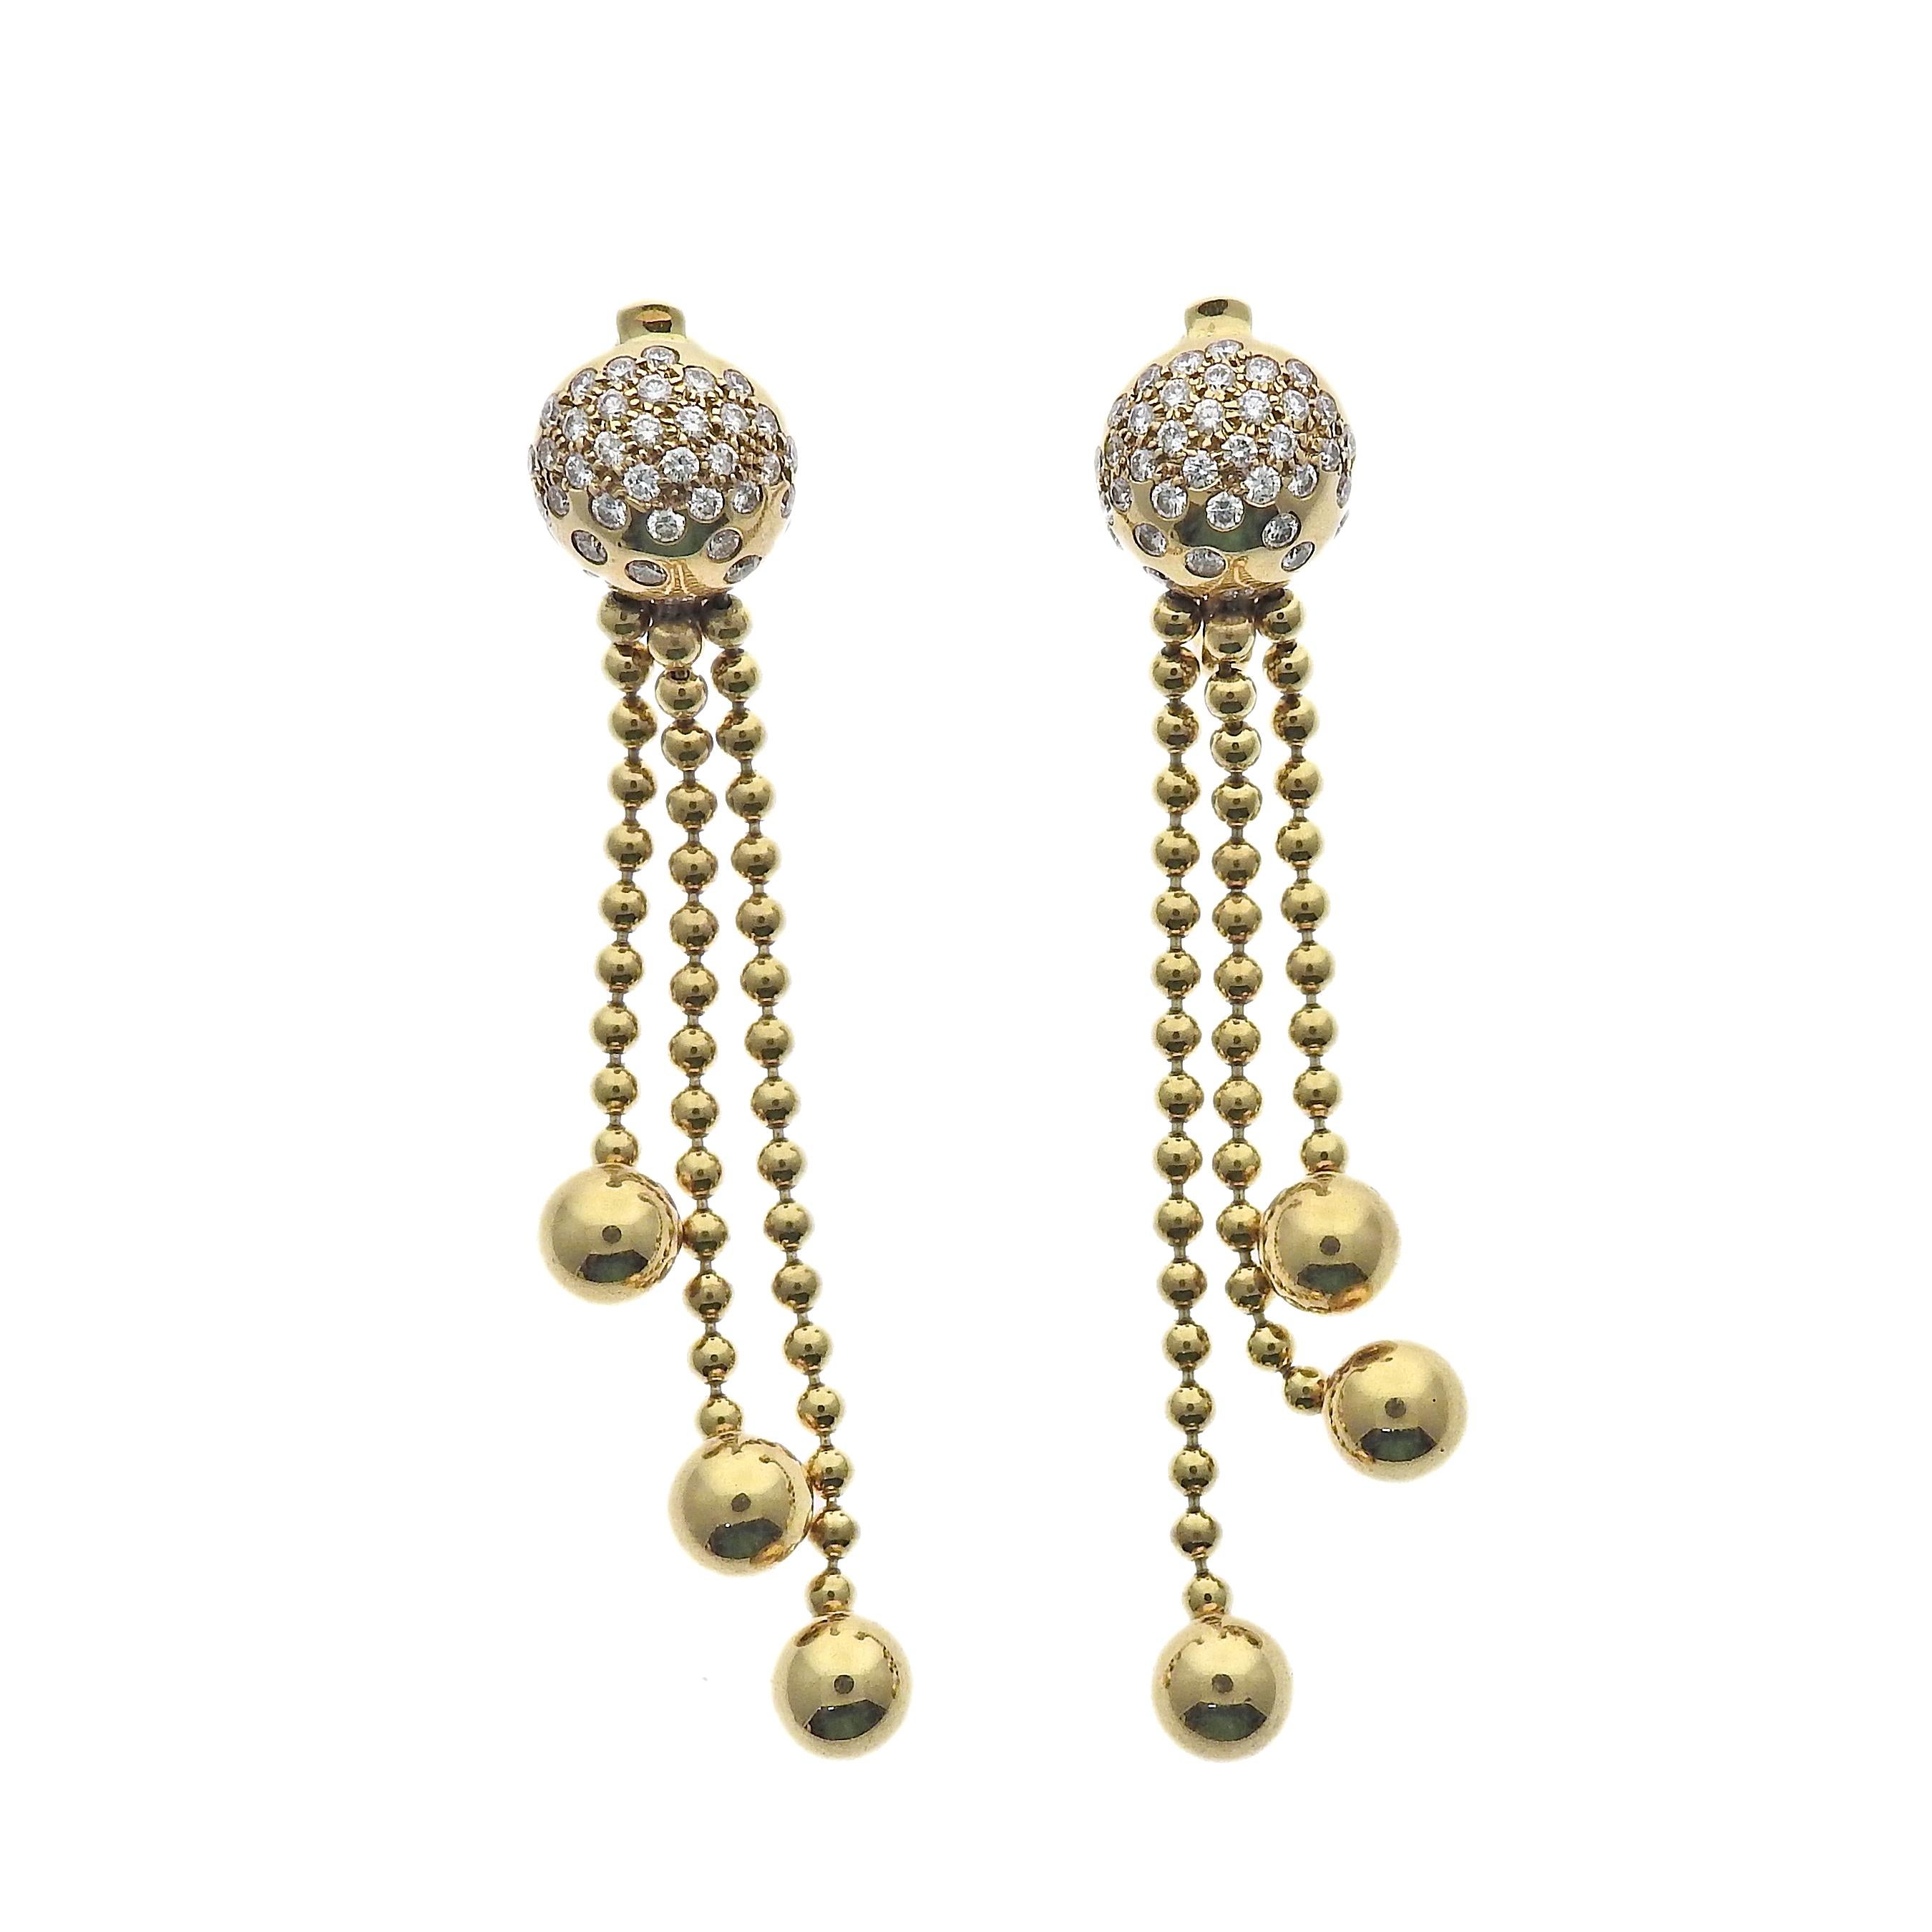 18k yellow gold drop earrings, crafted by Cartier for the Nouvelle Vague collection, set with 0.94ctw in VVS/F-G diamonds. Earrings measure 59mm long. Marked: Cartier, 750, 1999, Serial Number, French punch mark. Weight is 20.6 grams.